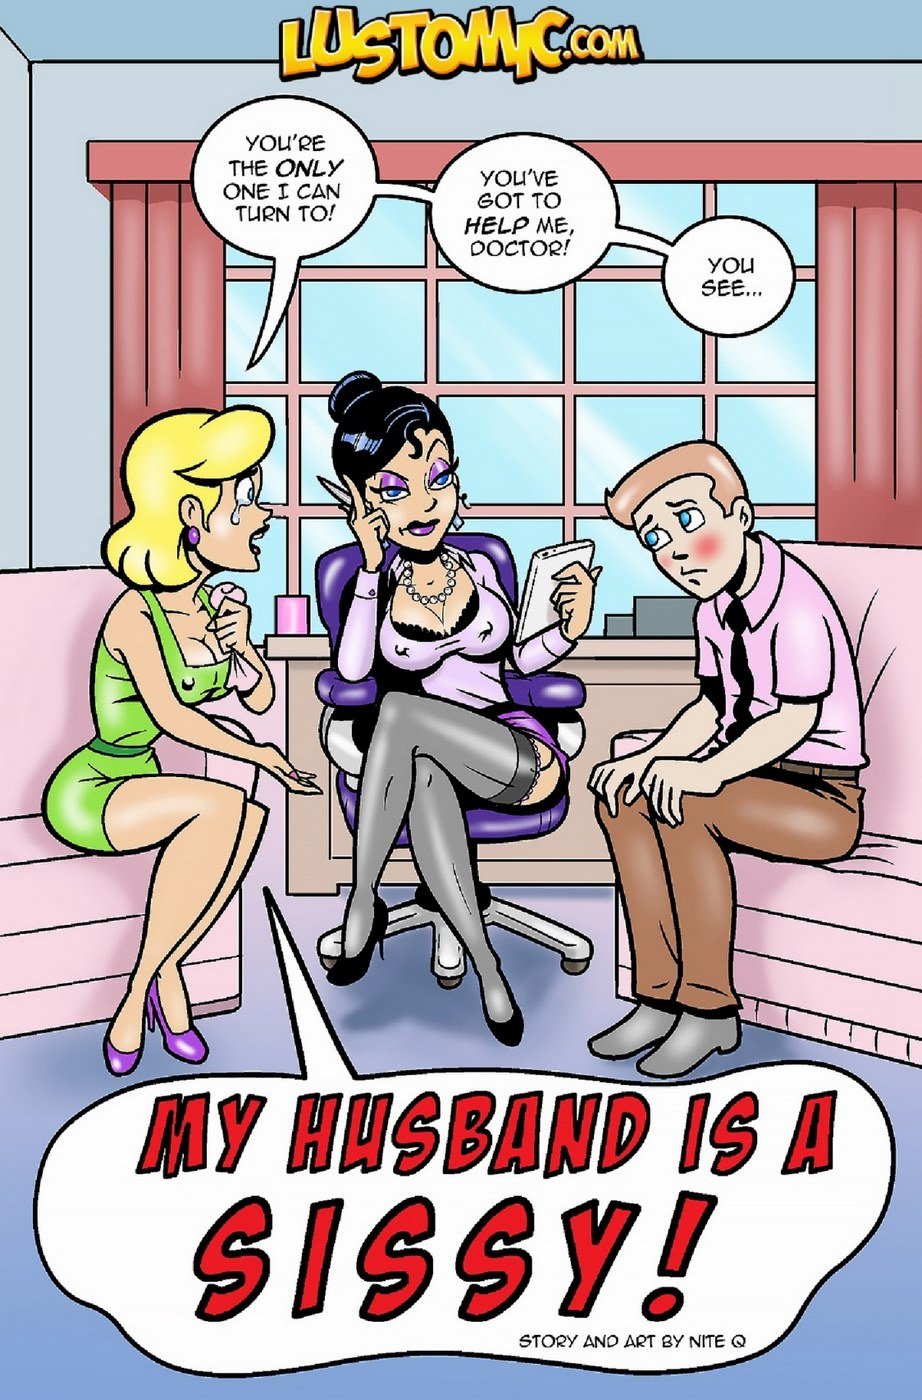 wife married a sissy hubby